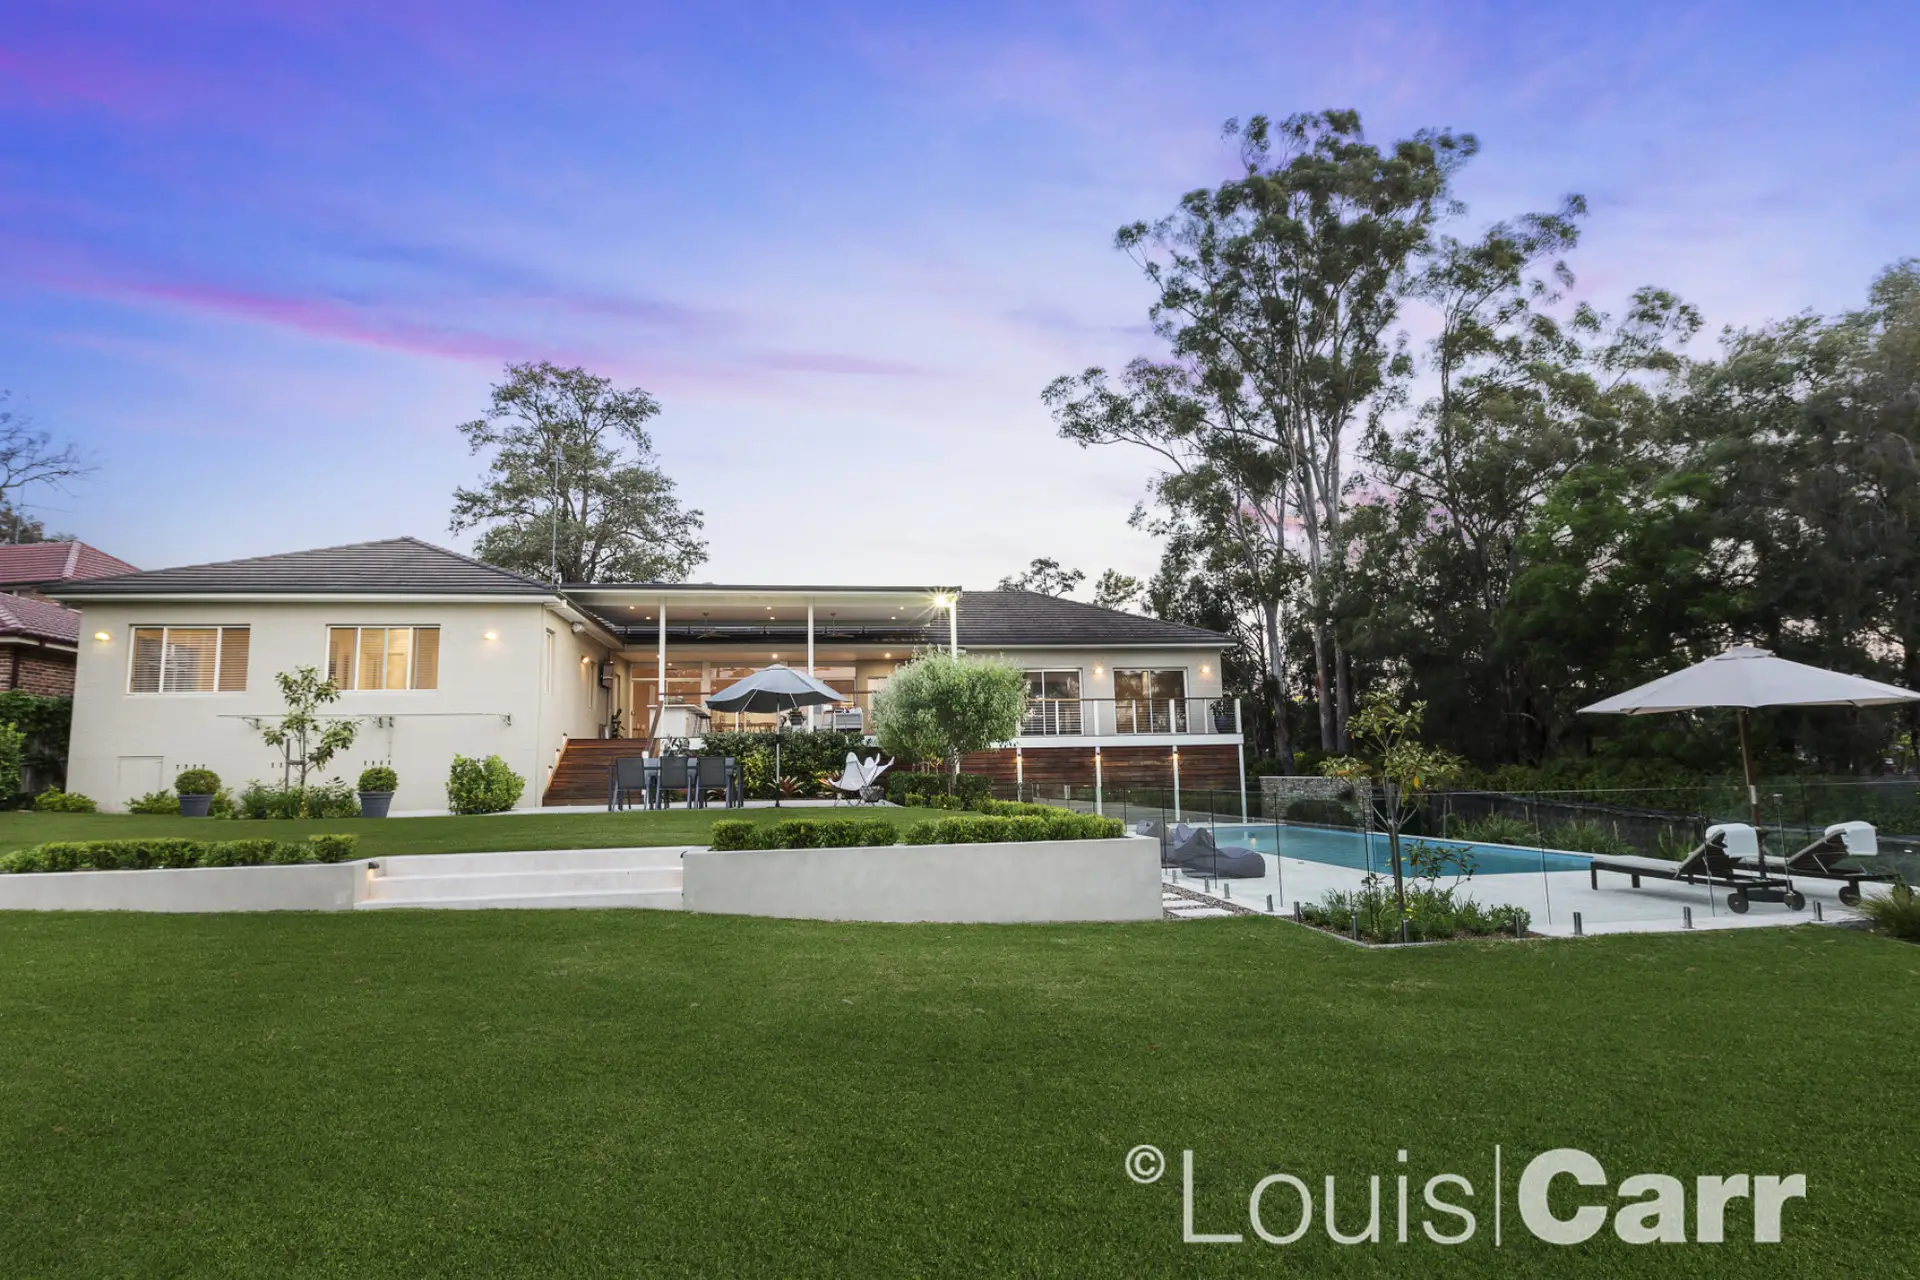 Photo #4: 8 Crego Road, Glenhaven - Sold by Louis Carr Real Estate